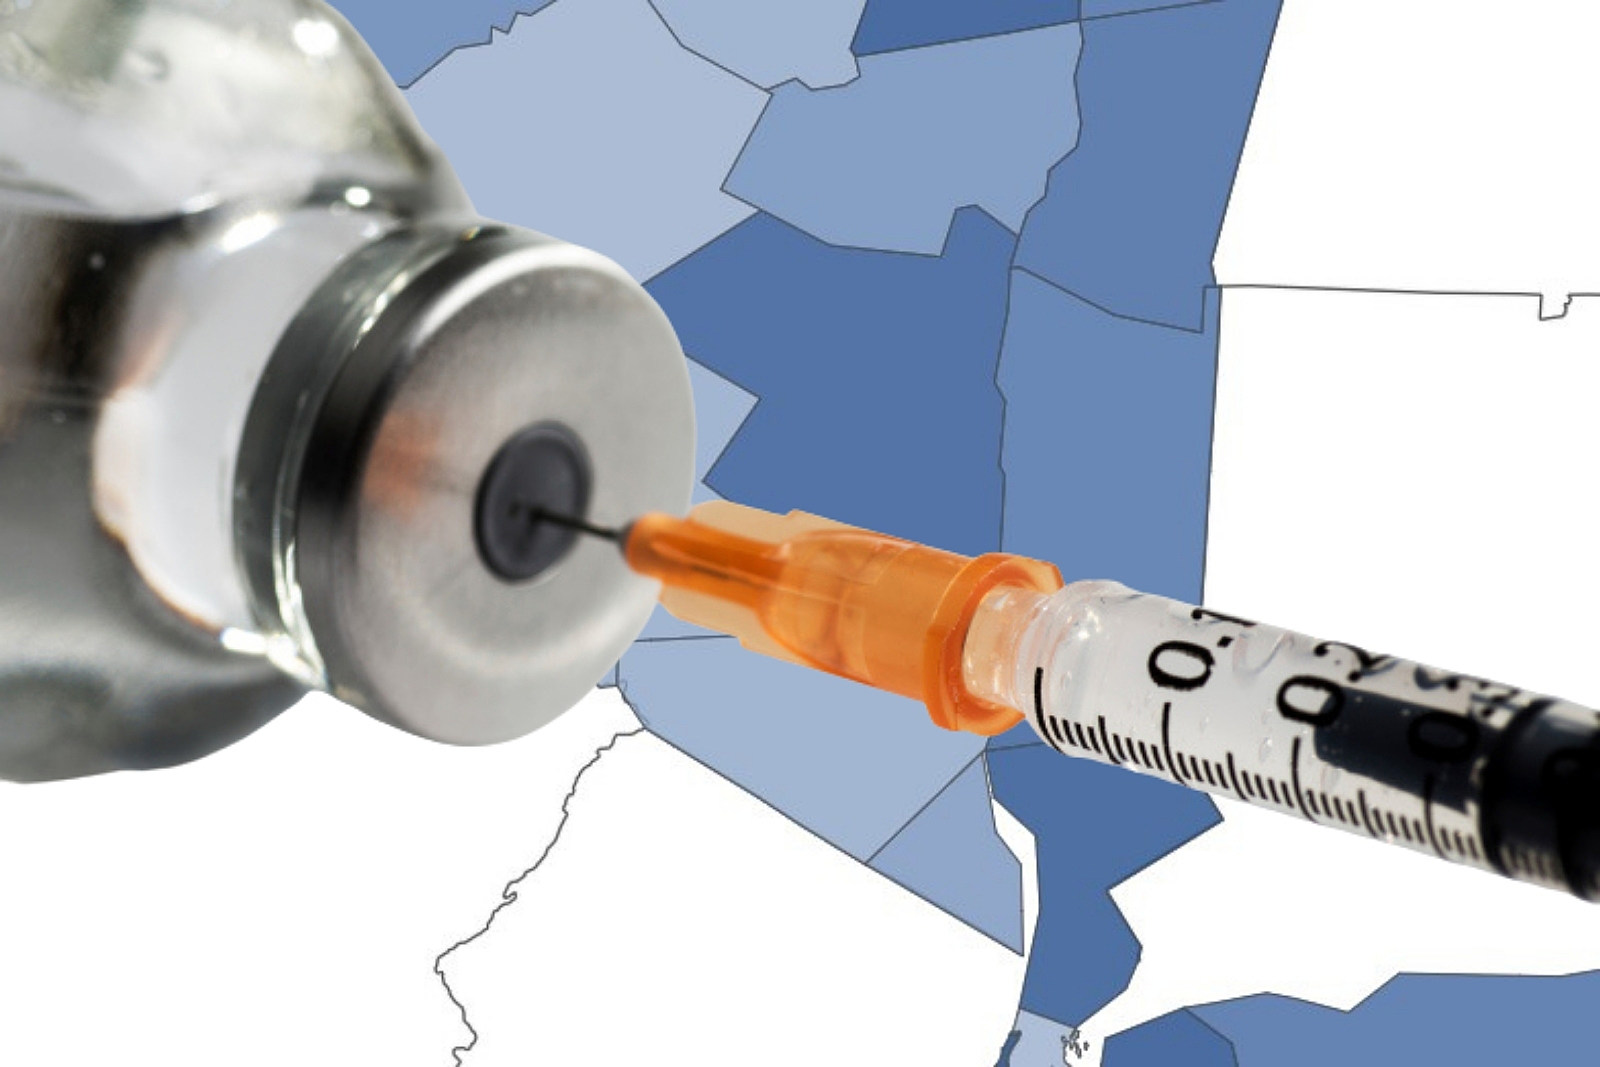 New York Releases Shocking Study on COVID Vaccine Effectiveness